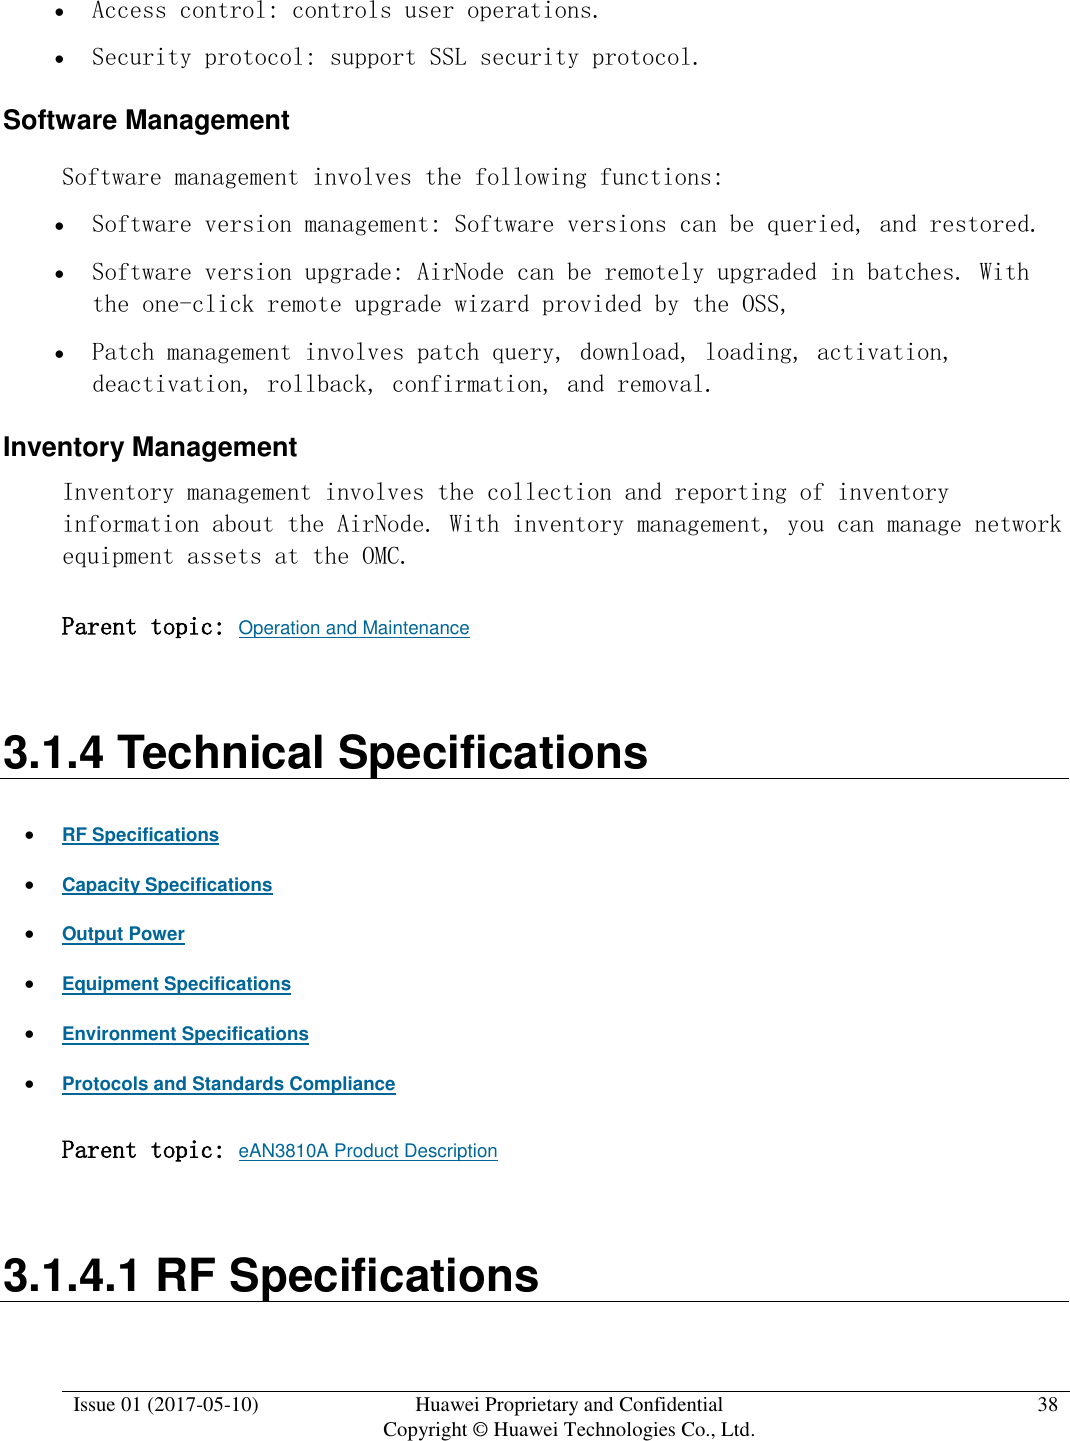  Issue 01 (2017-05-10) Huawei Proprietary and Confidential      Copyright © Huawei Technologies Co., Ltd. 38   Access control: controls user operations.  Security protocol: support SSL security protocol. Software Management Software management involves the following functions:   Software version management: Software versions can be queried, and restored.  Software version upgrade: AirNode can be remotely upgraded in batches. With the one-click remote upgrade wizard provided by the OSS,  Patch management involves patch query, download, loading, activation, deactivation, rollback, confirmation, and removal. Inventory Management Inventory management involves the collection and reporting of inventory information about the AirNode. With inventory management, you can manage network equipment assets at the OMC.  Parent topic: Operation and Maintenance 3.1.4 Technical Specifications  RF Specifications  Capacity Specifications  Output Power  Equipment Specifications  Environment Specifications  Protocols and Standards Compliance Parent topic: eAN3810A Product Description 3.1.4.1 RF Specifications 